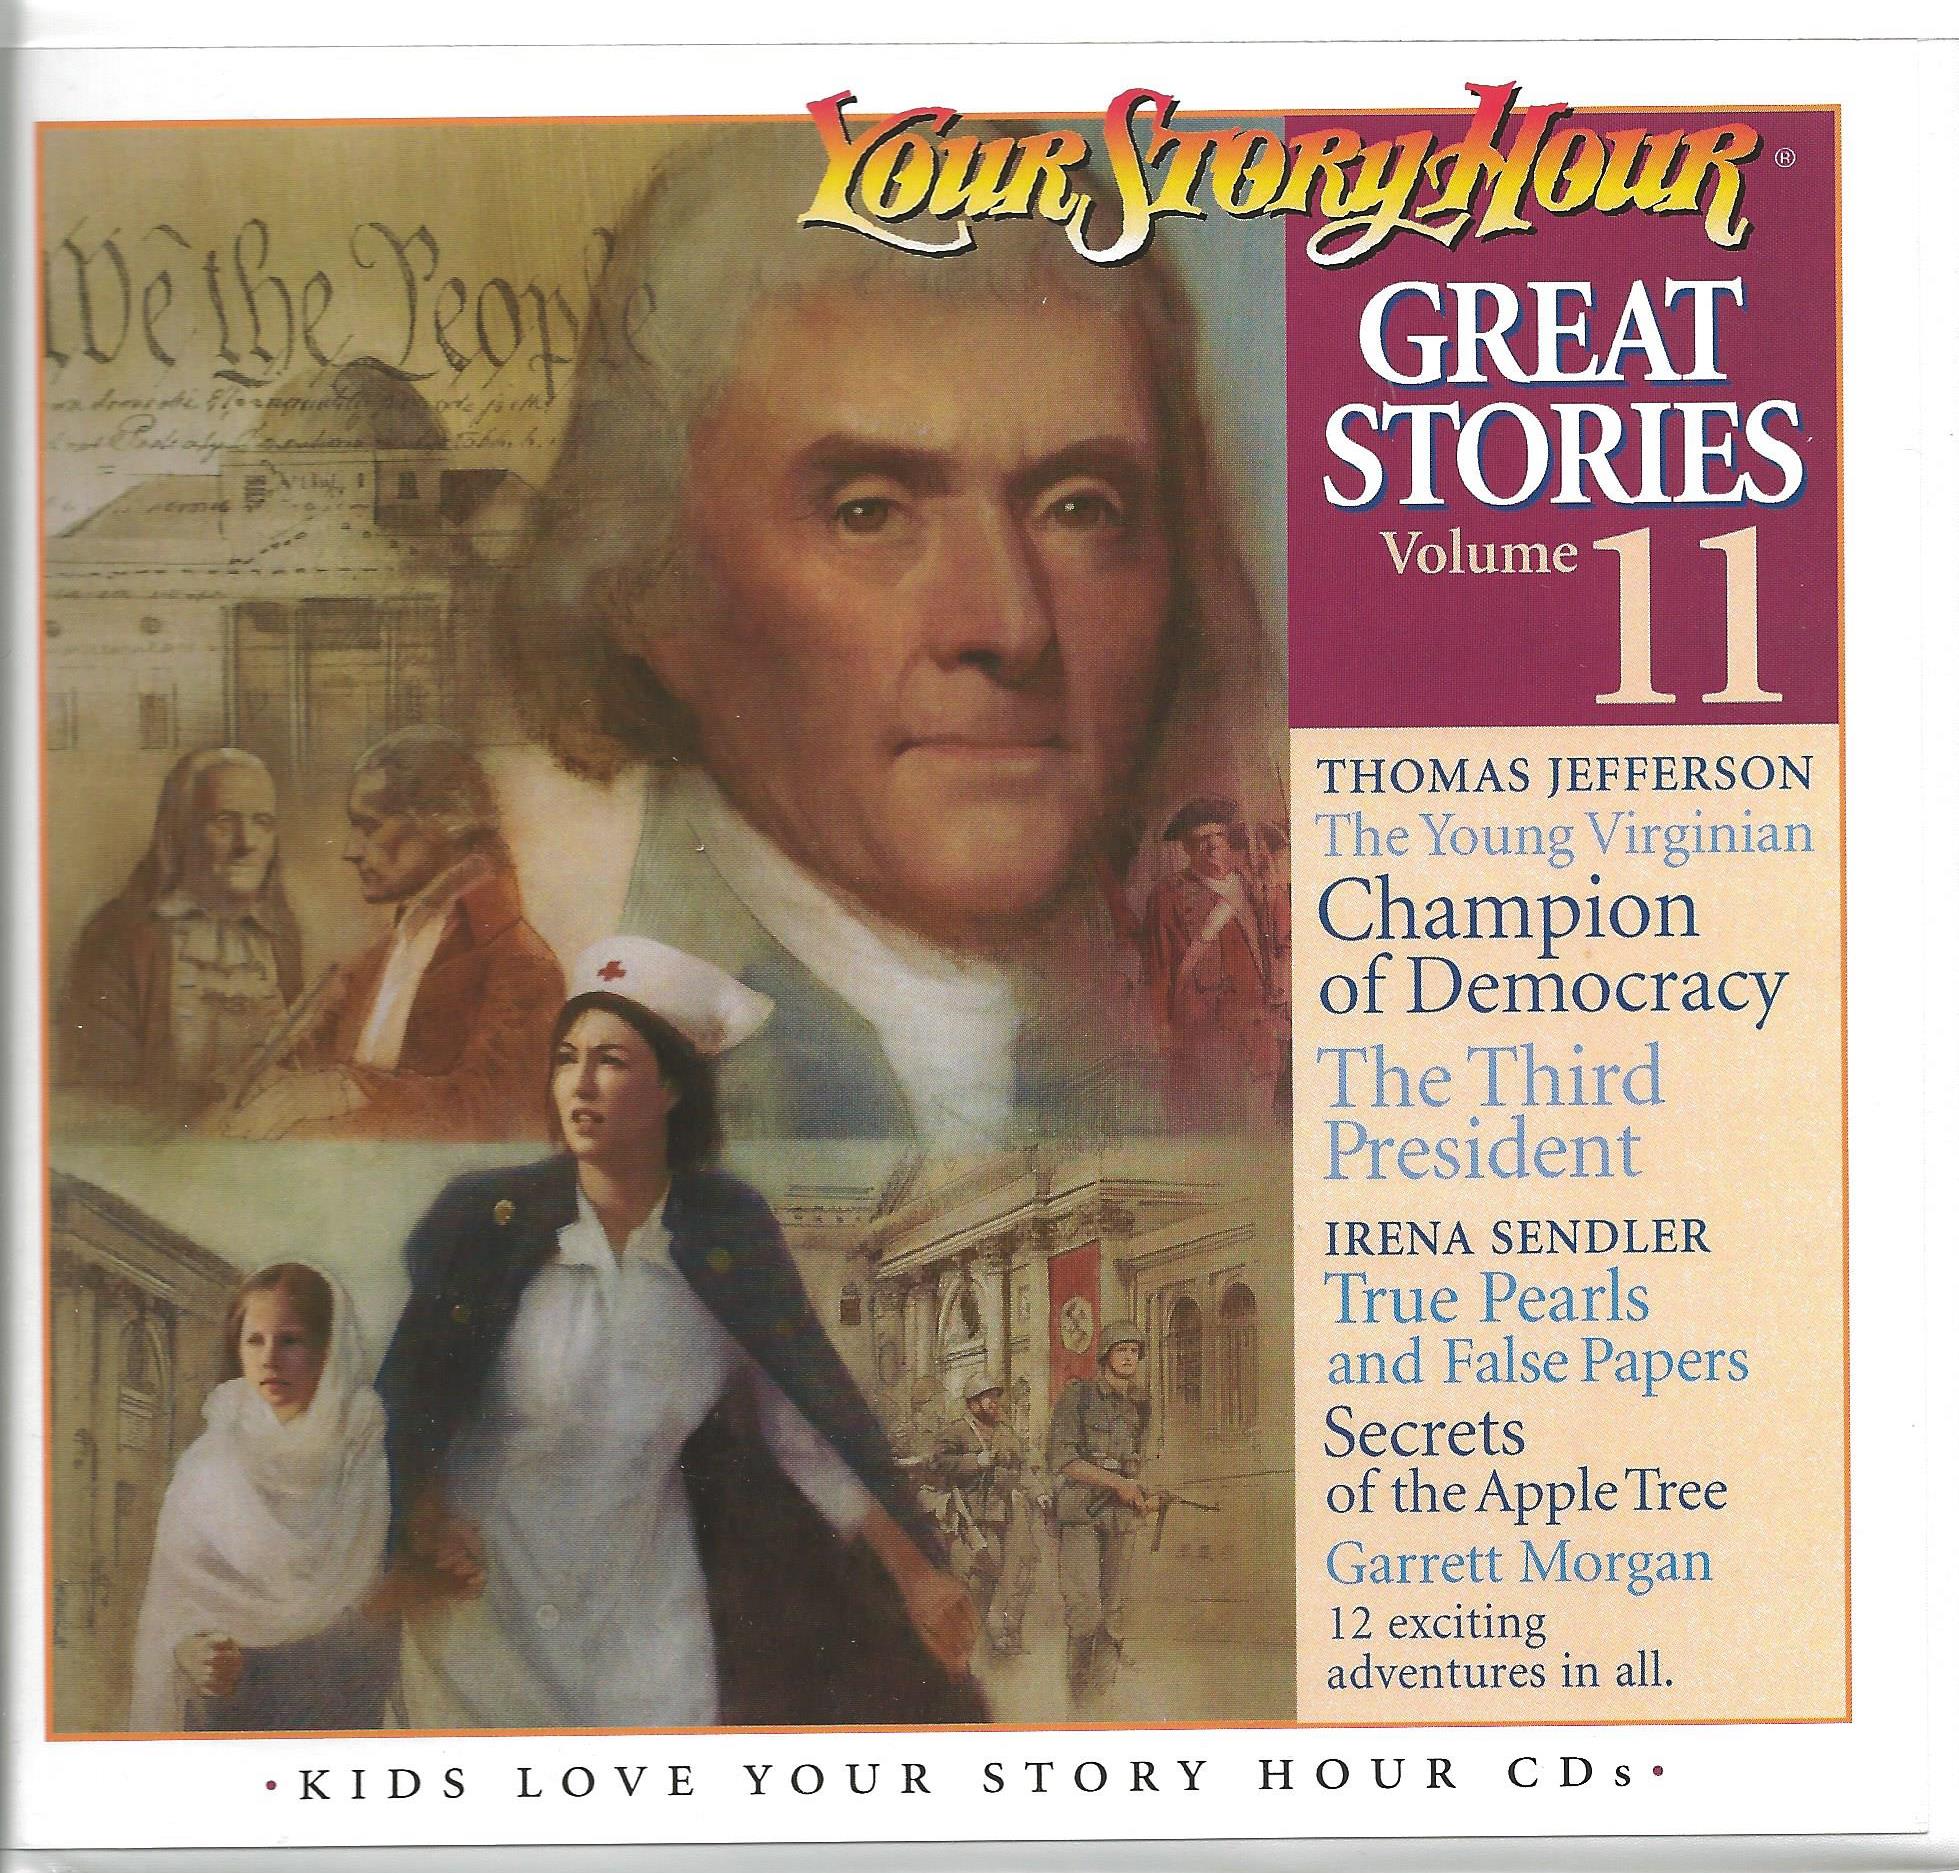 GREAT STORIES VOLUME 11 CD ALBUM Your Story Hour - Click Image to Close